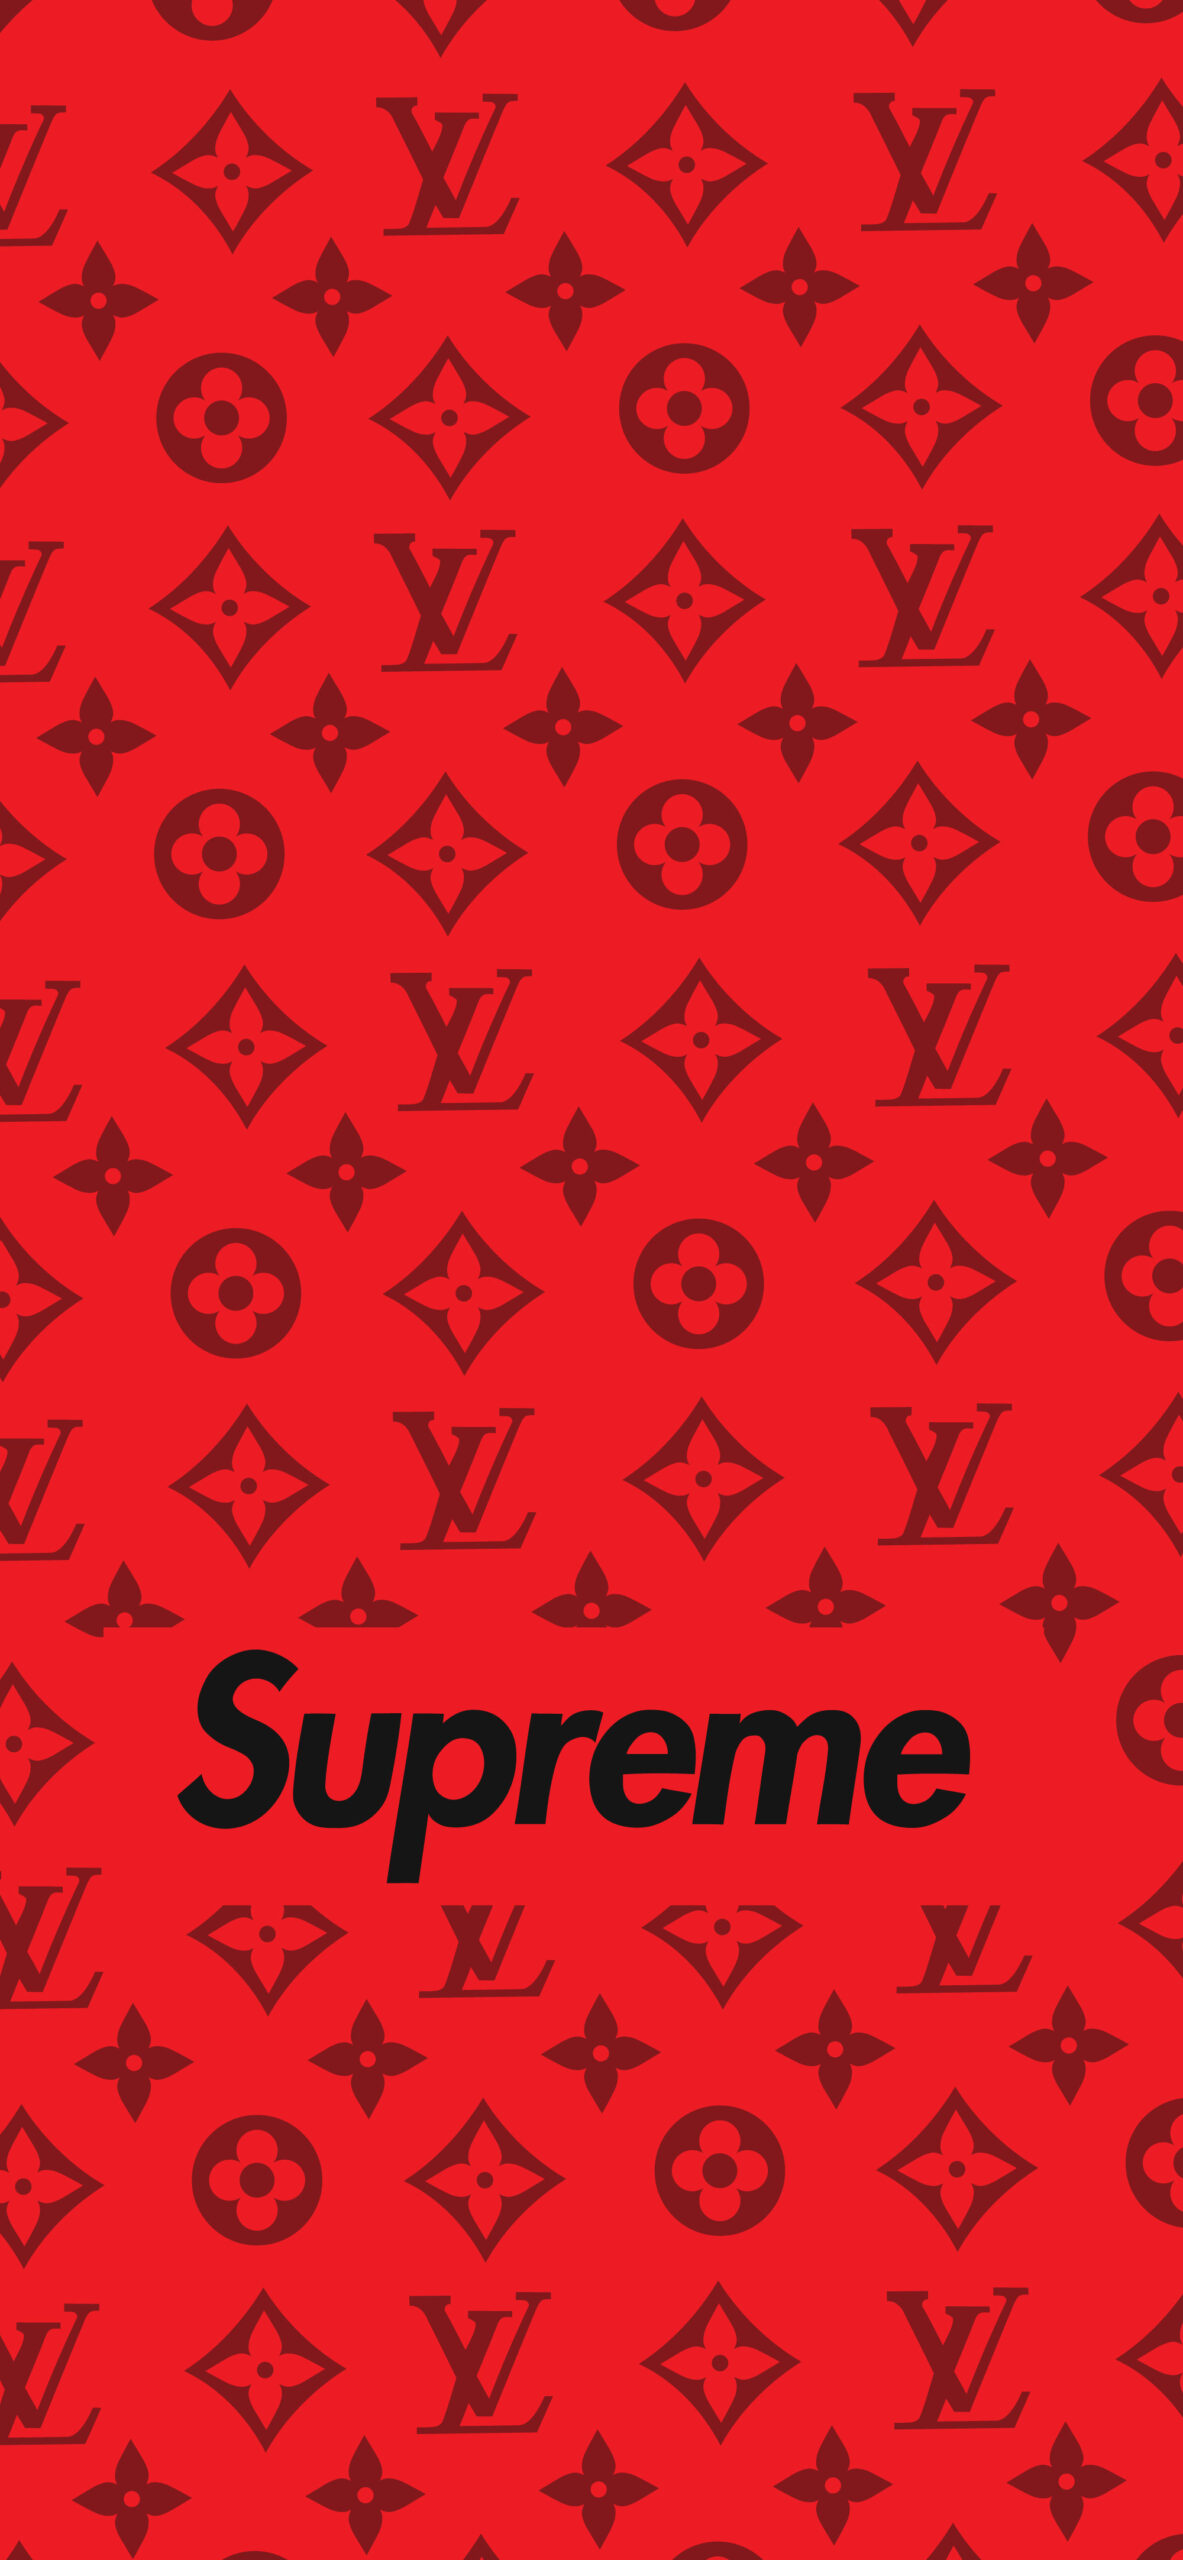 The supreme logo on a red background - Louis Vuitton